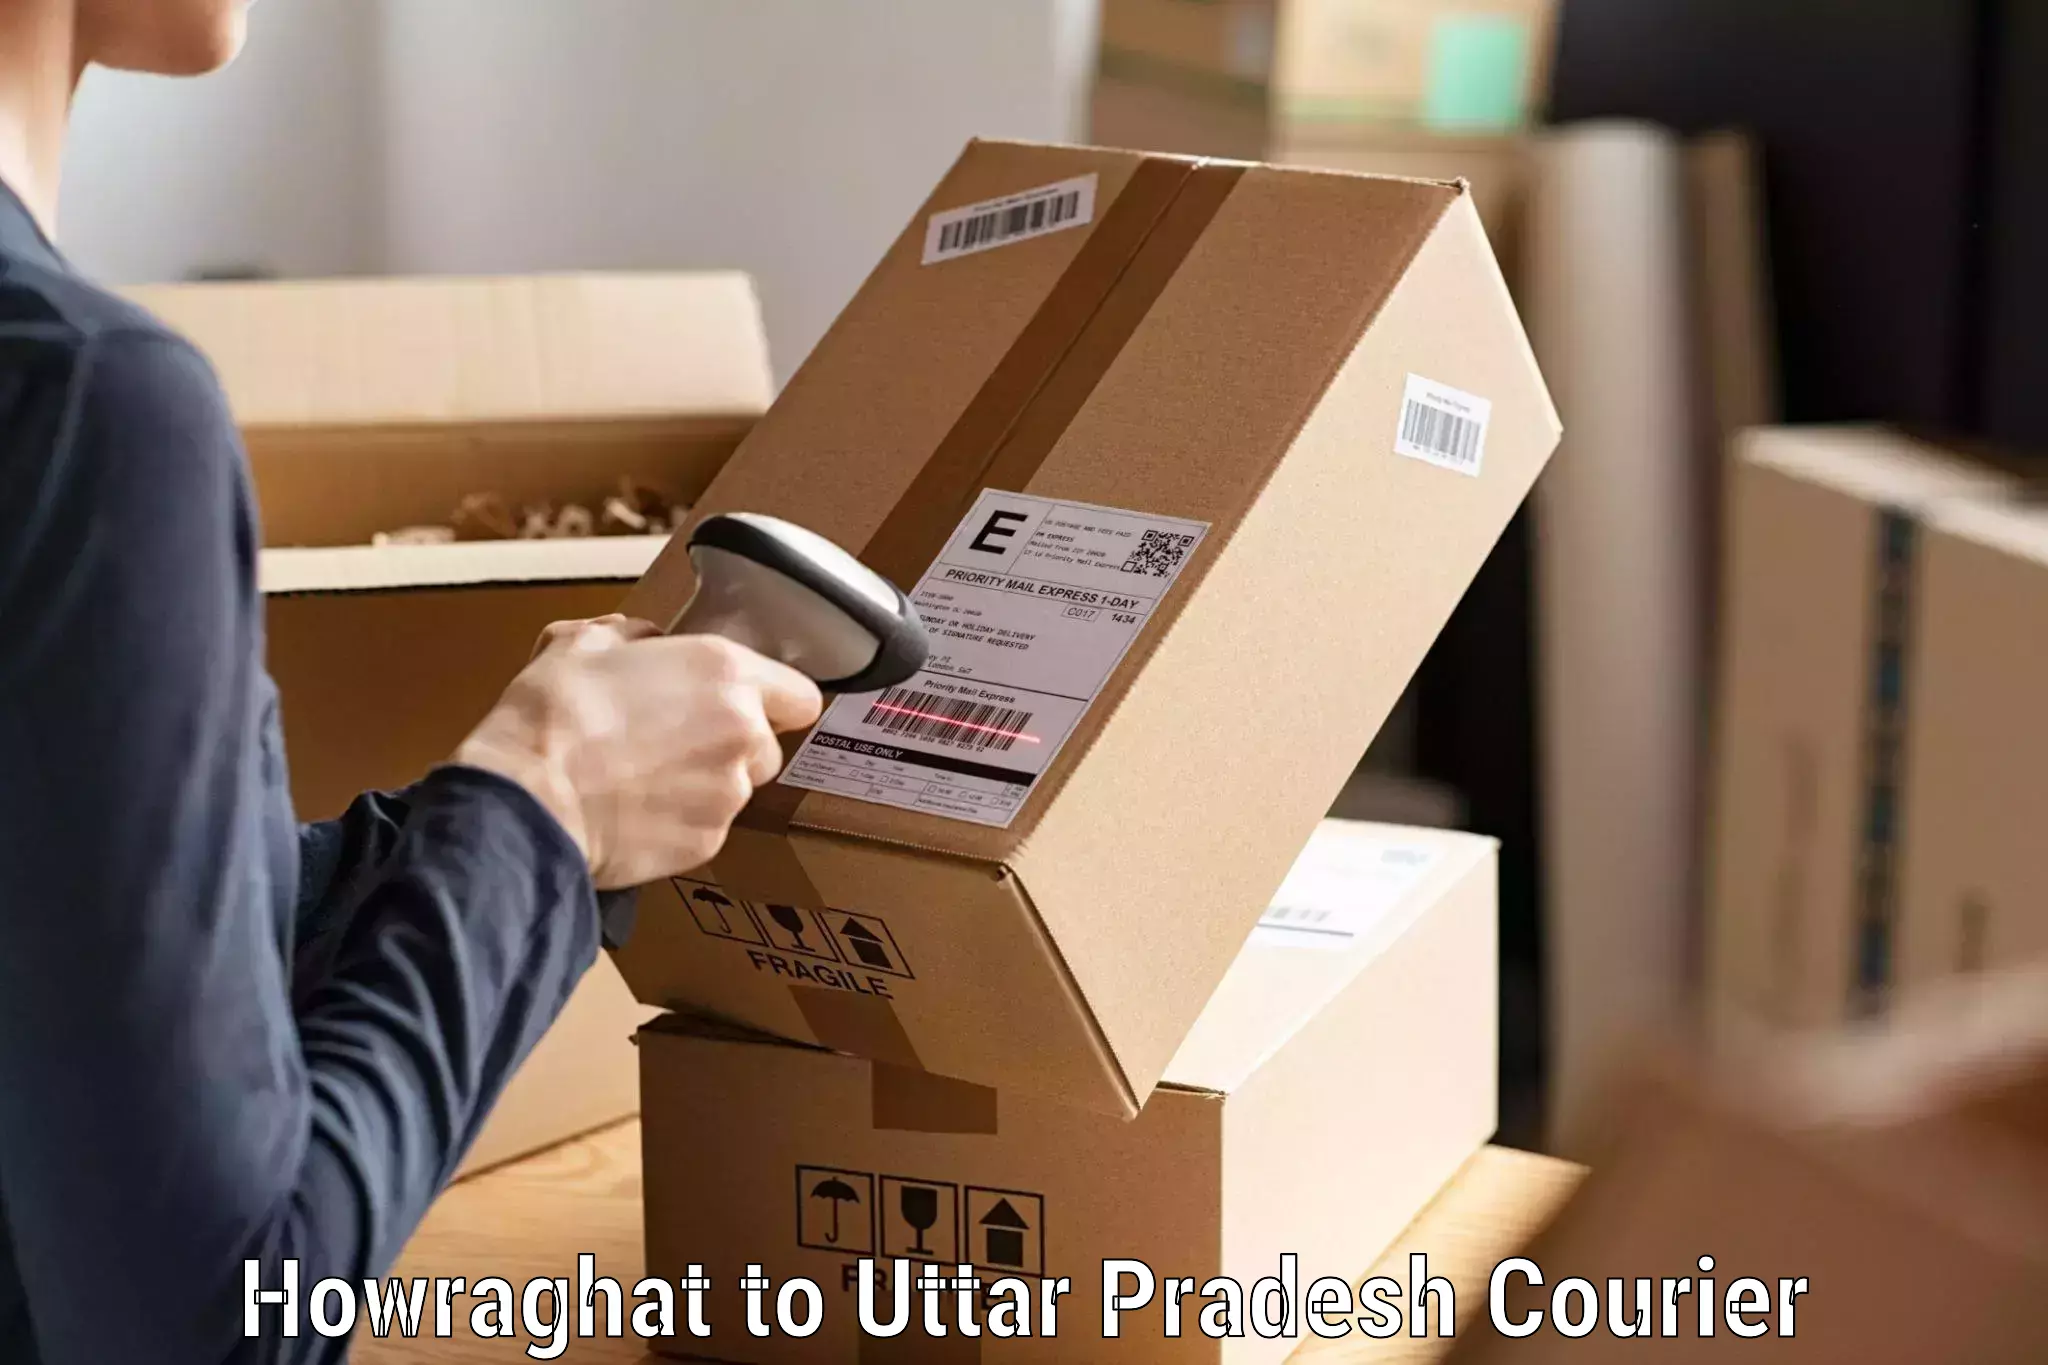 Customer-oriented courier services Howraghat to Uttar Pradesh